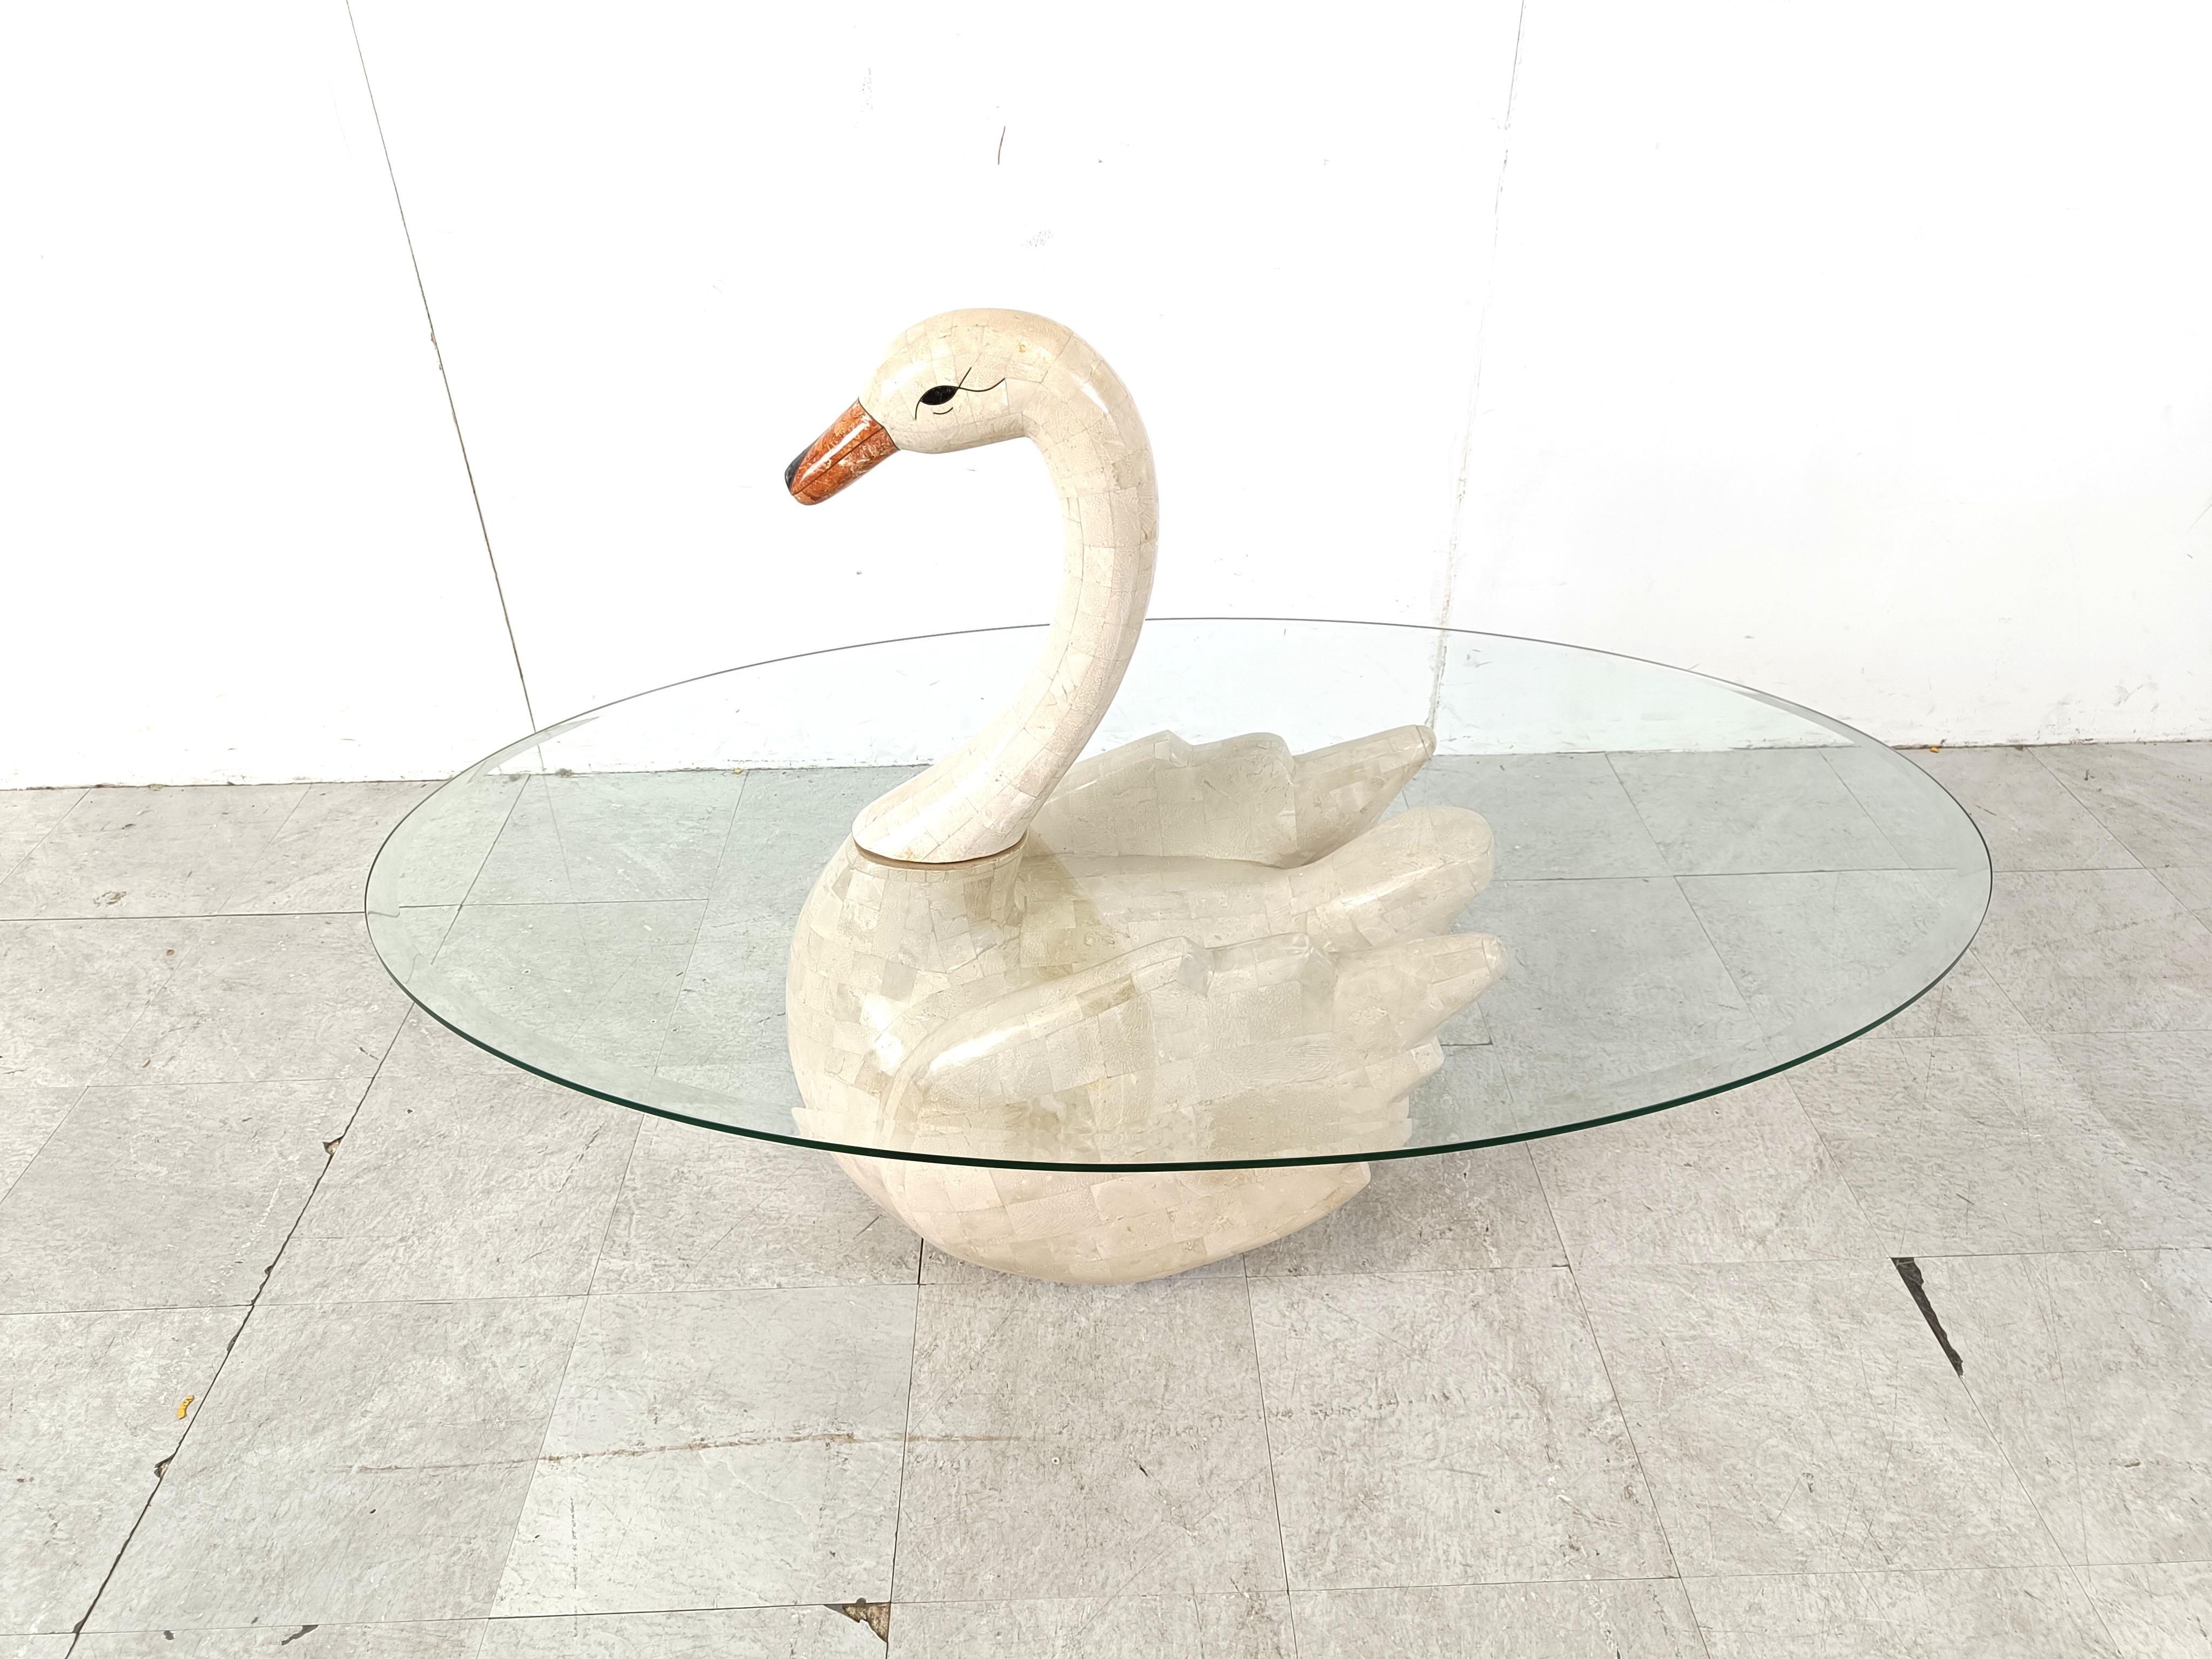 Unique vintage tesselated stone coffee table depicting a swan.

Clear oval beveled glass top.

Gorgeous and very elegant coffee table, a real eye catcher.

1980s - Asia

Dimensions
Height: 88cm
Width: 135cm
Depth: 80cm

Ref.: 543544